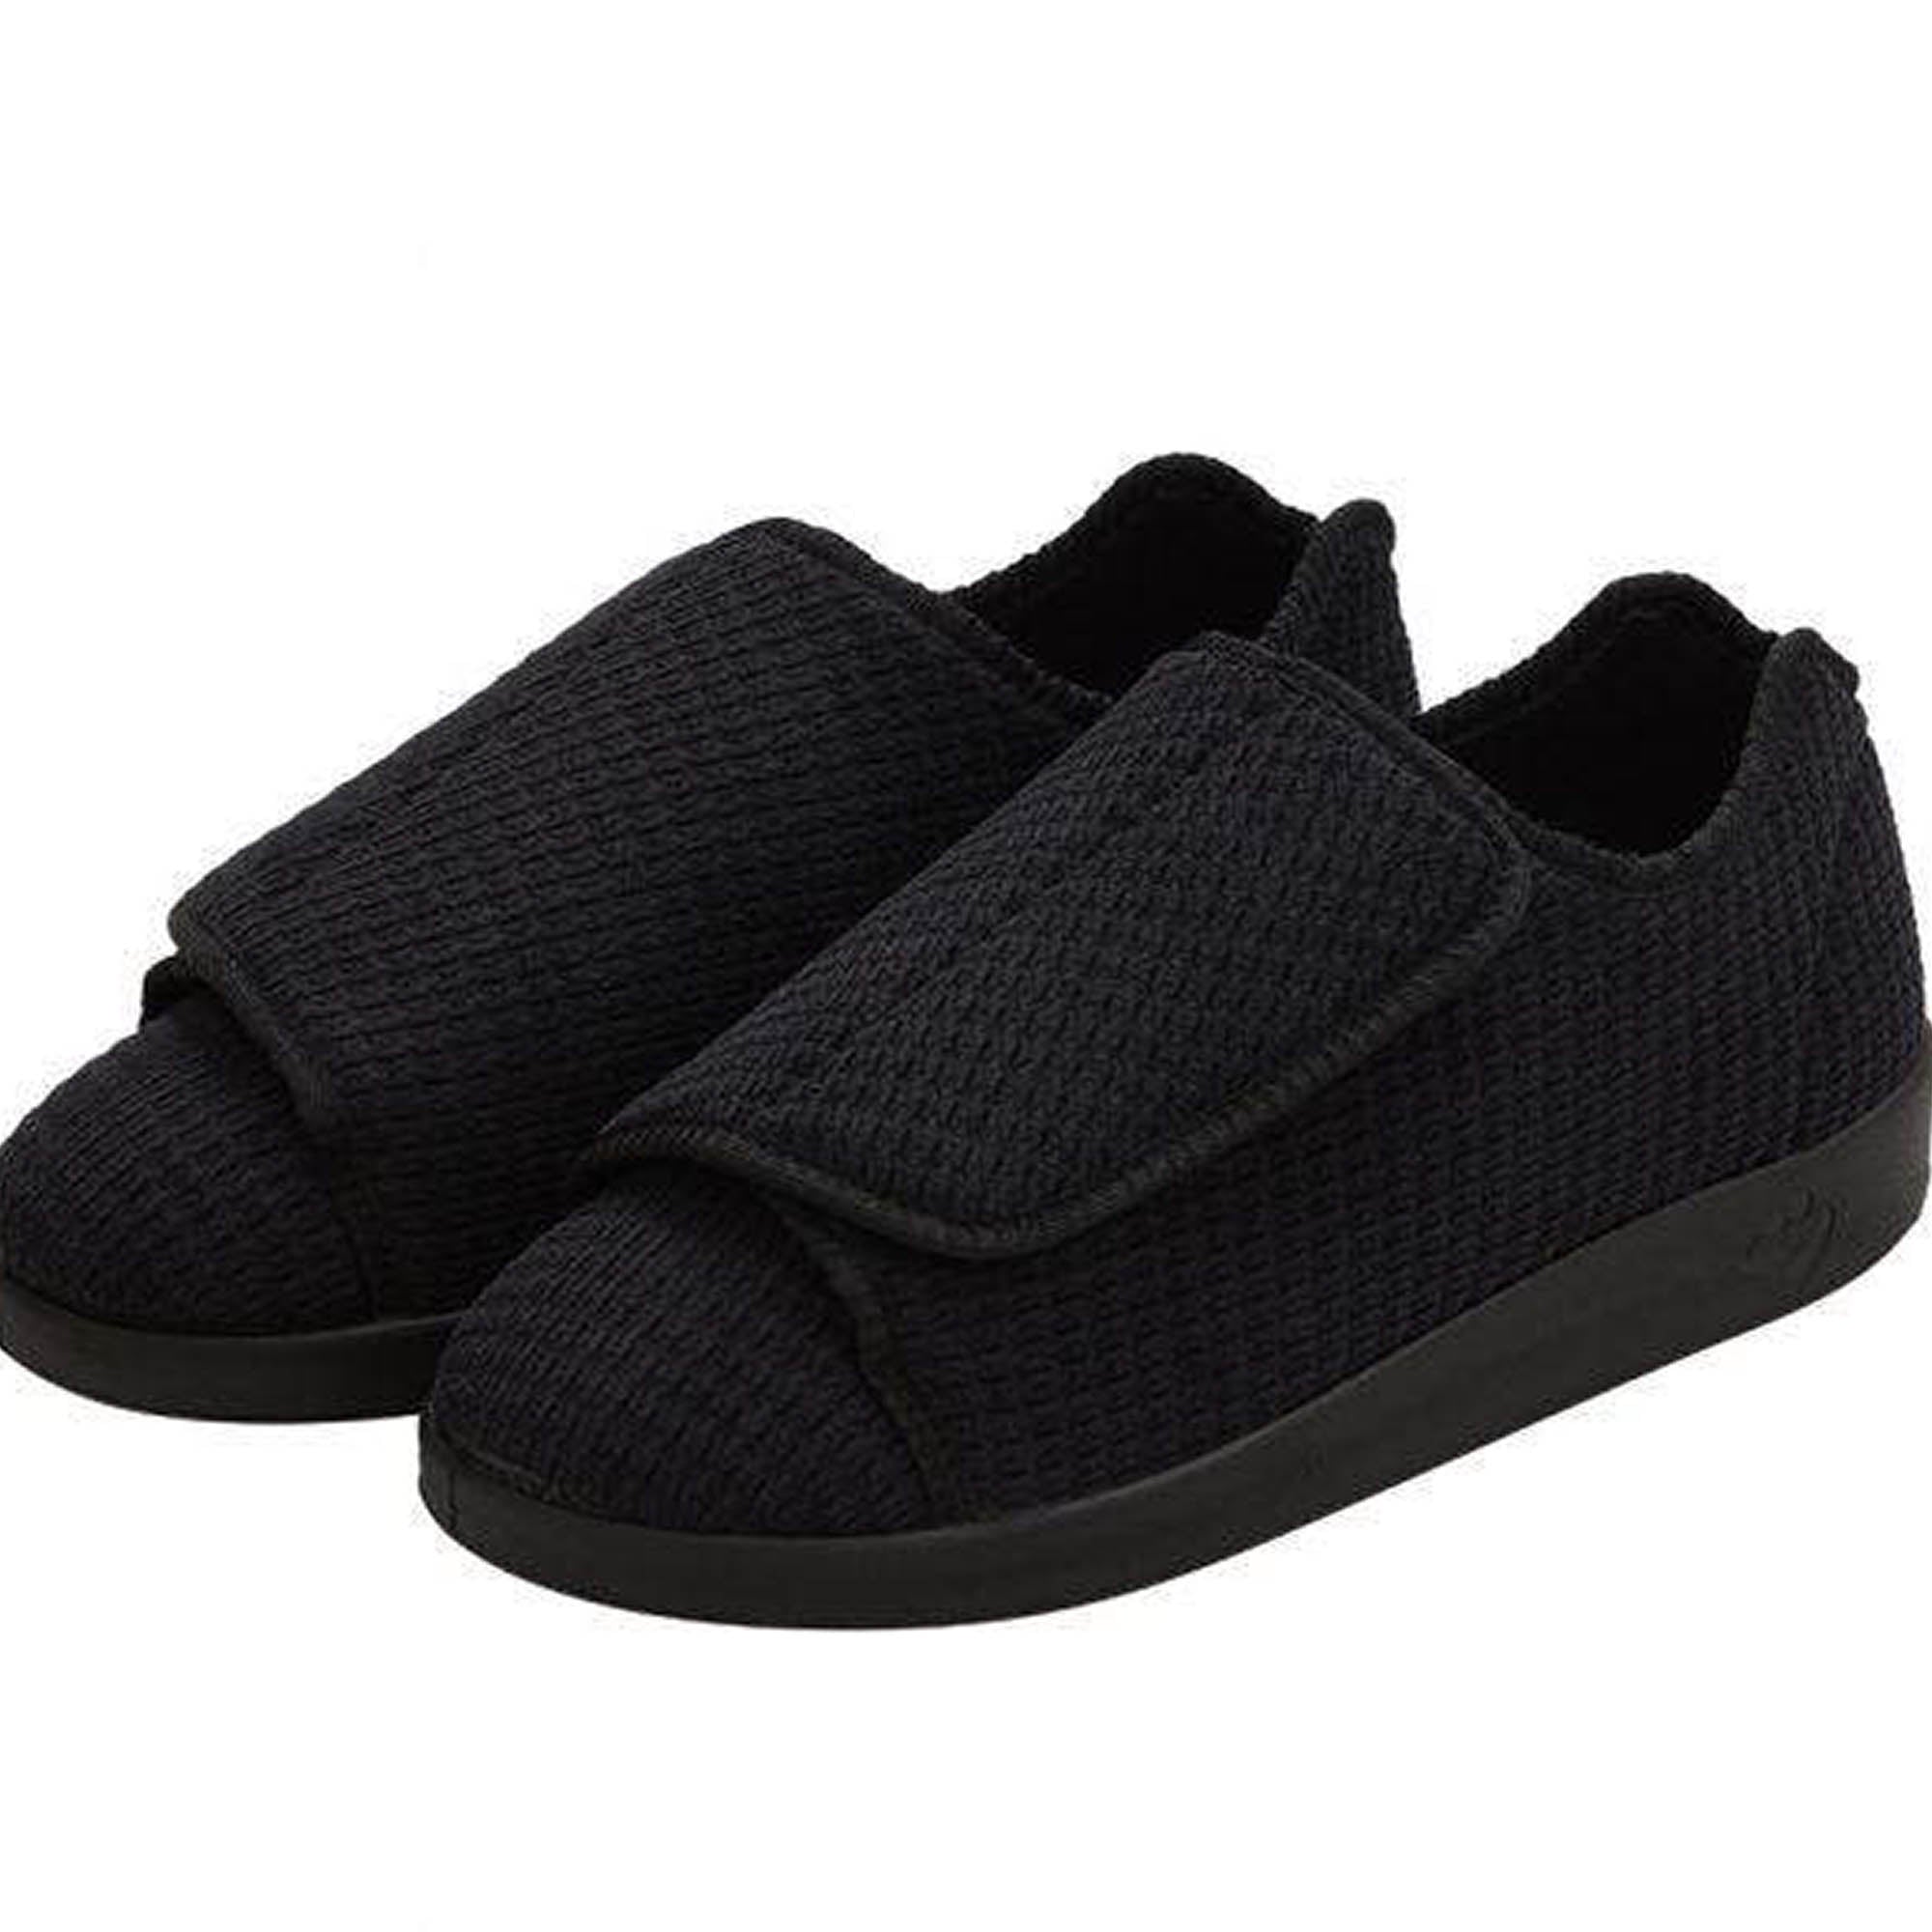 Silverts Men's Extra Extra Wide Slip-Resistant Slippers - Black - 8